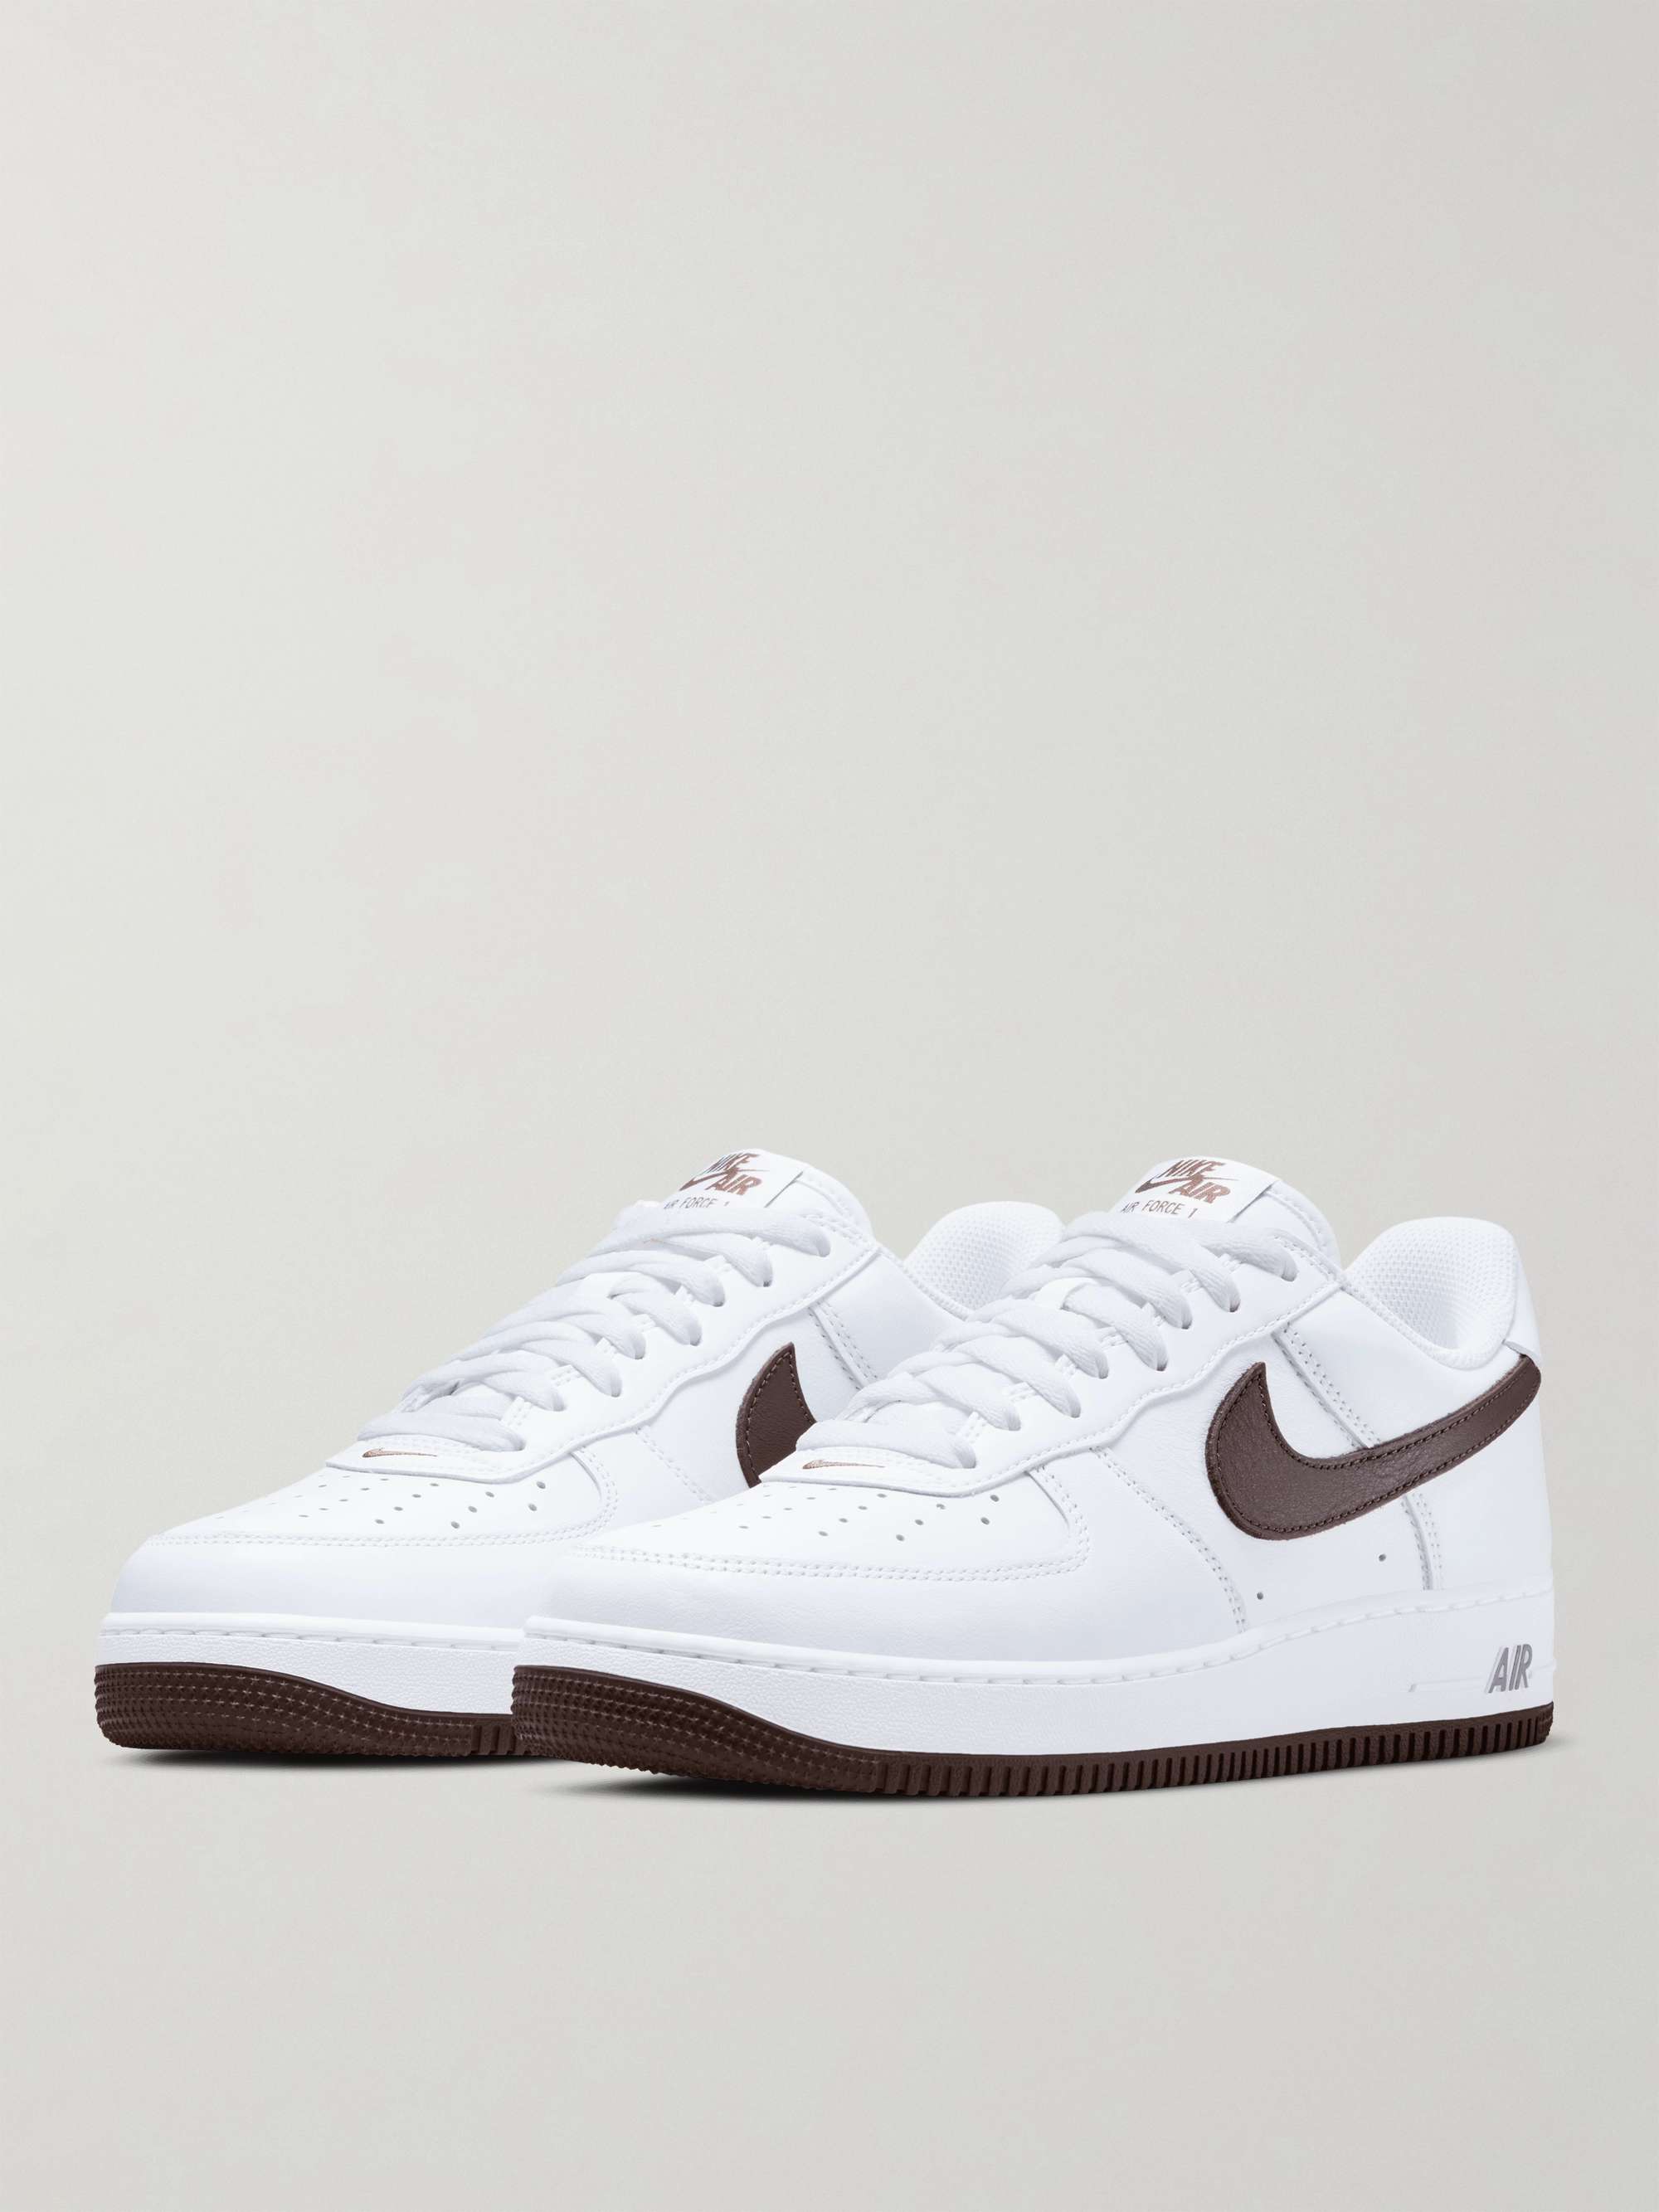 White Air Force 1 Low Retro Leather Sneakers | NIKE | MR PORTER